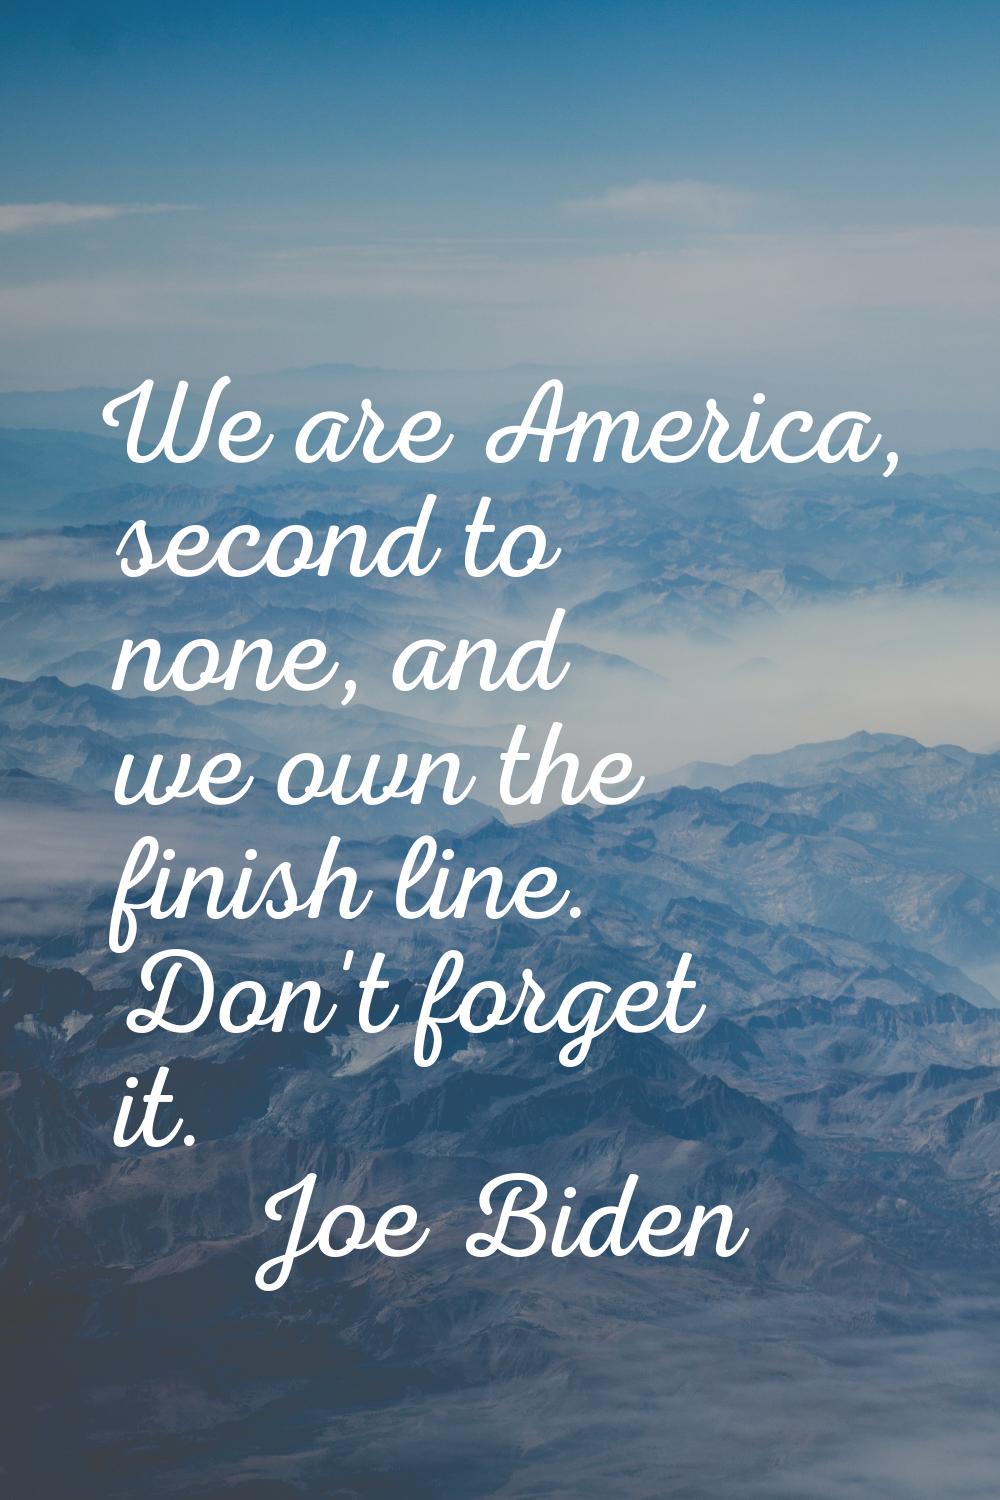 We are America, second to none, and we own the finish line. Don't forget it.